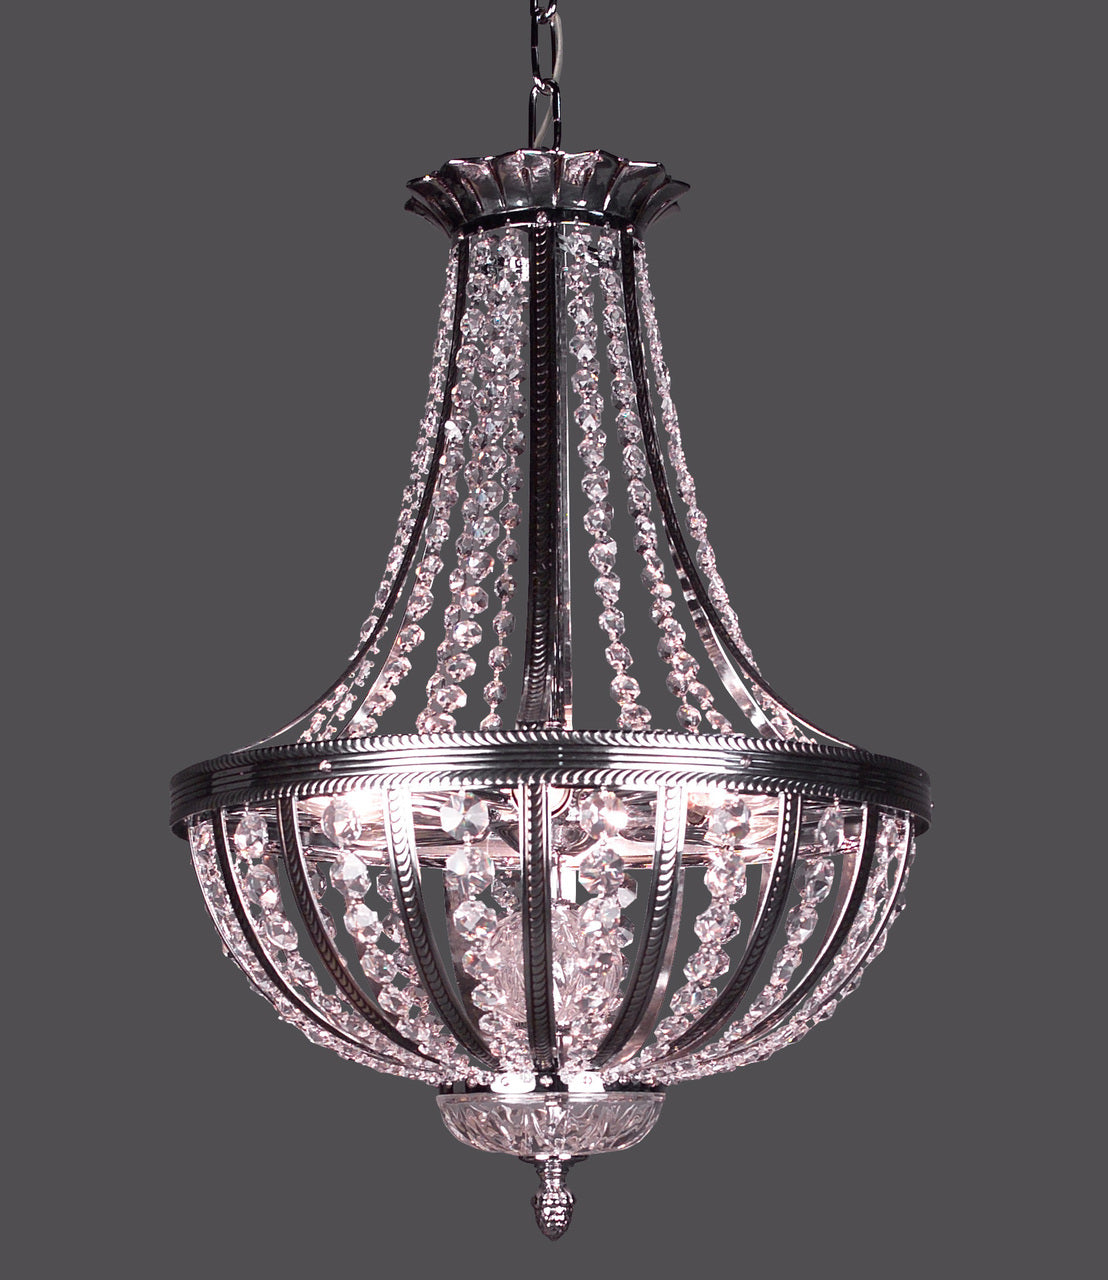 Classic Lighting 1924 CHB CP Terragona Crystal Pendant in Chrome/Black Patina (Imported from Spain)